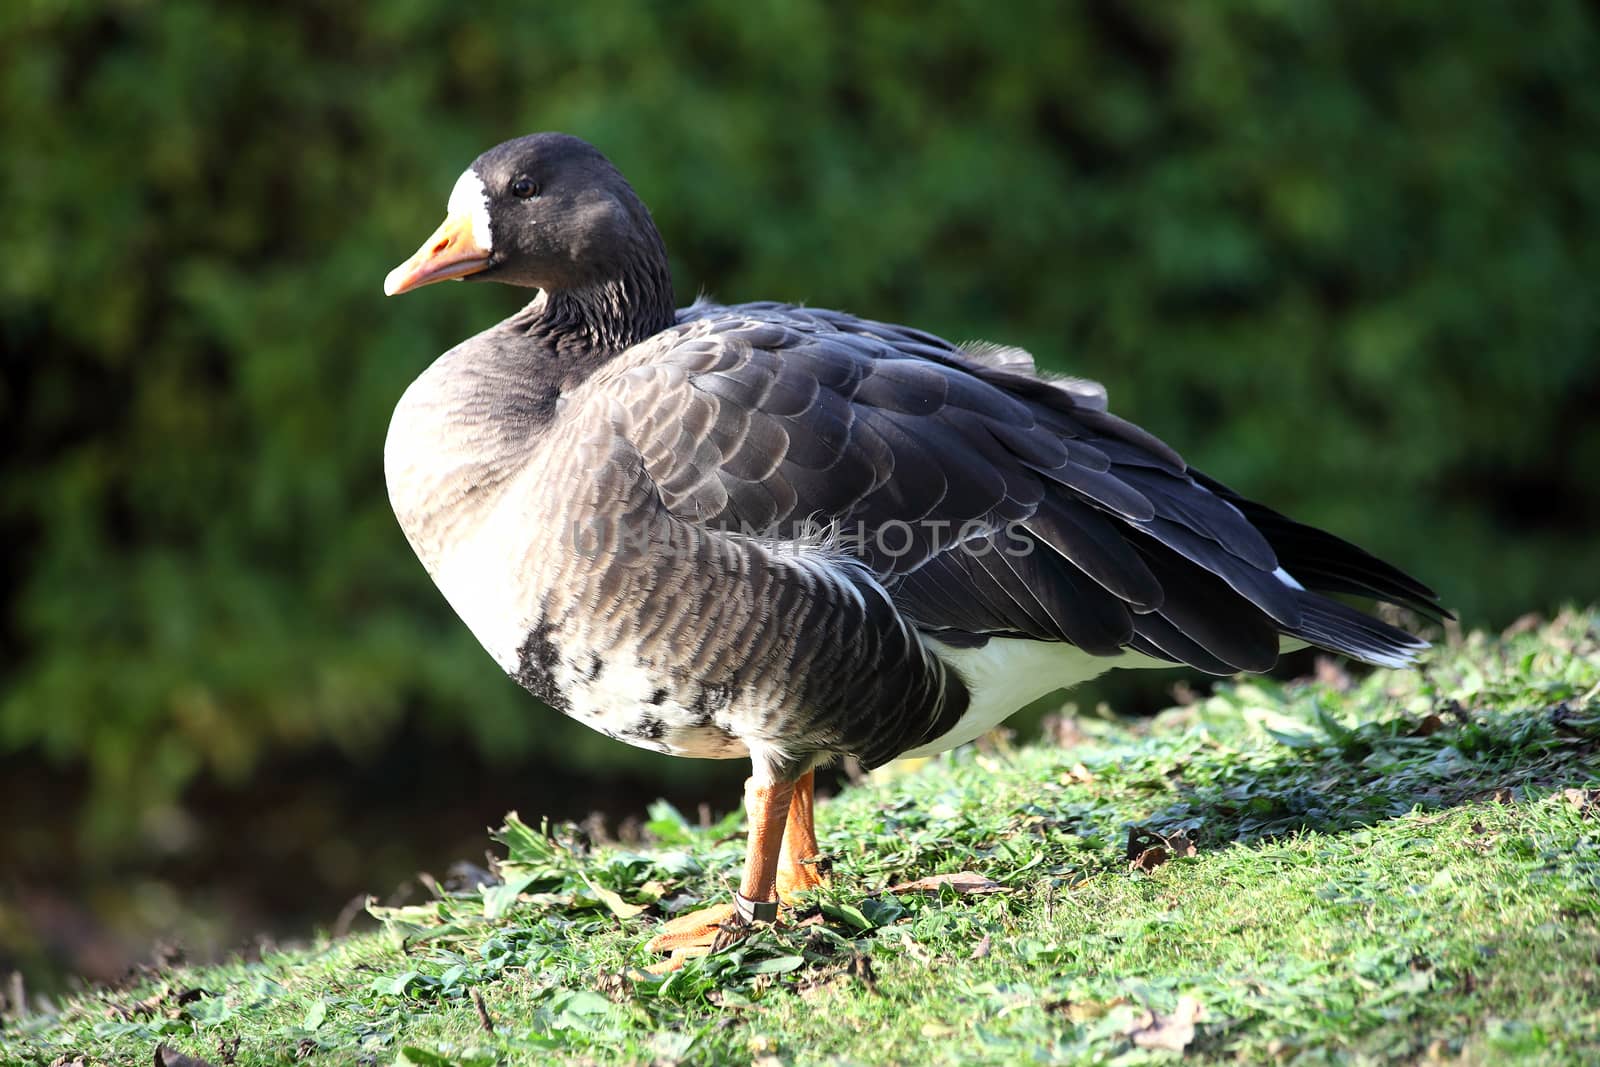  Anser albifrons, White Fronted Goose which breeds in Greenland and although now becoming an endangered  bird can be found around the coastline of the British Isles stock photo